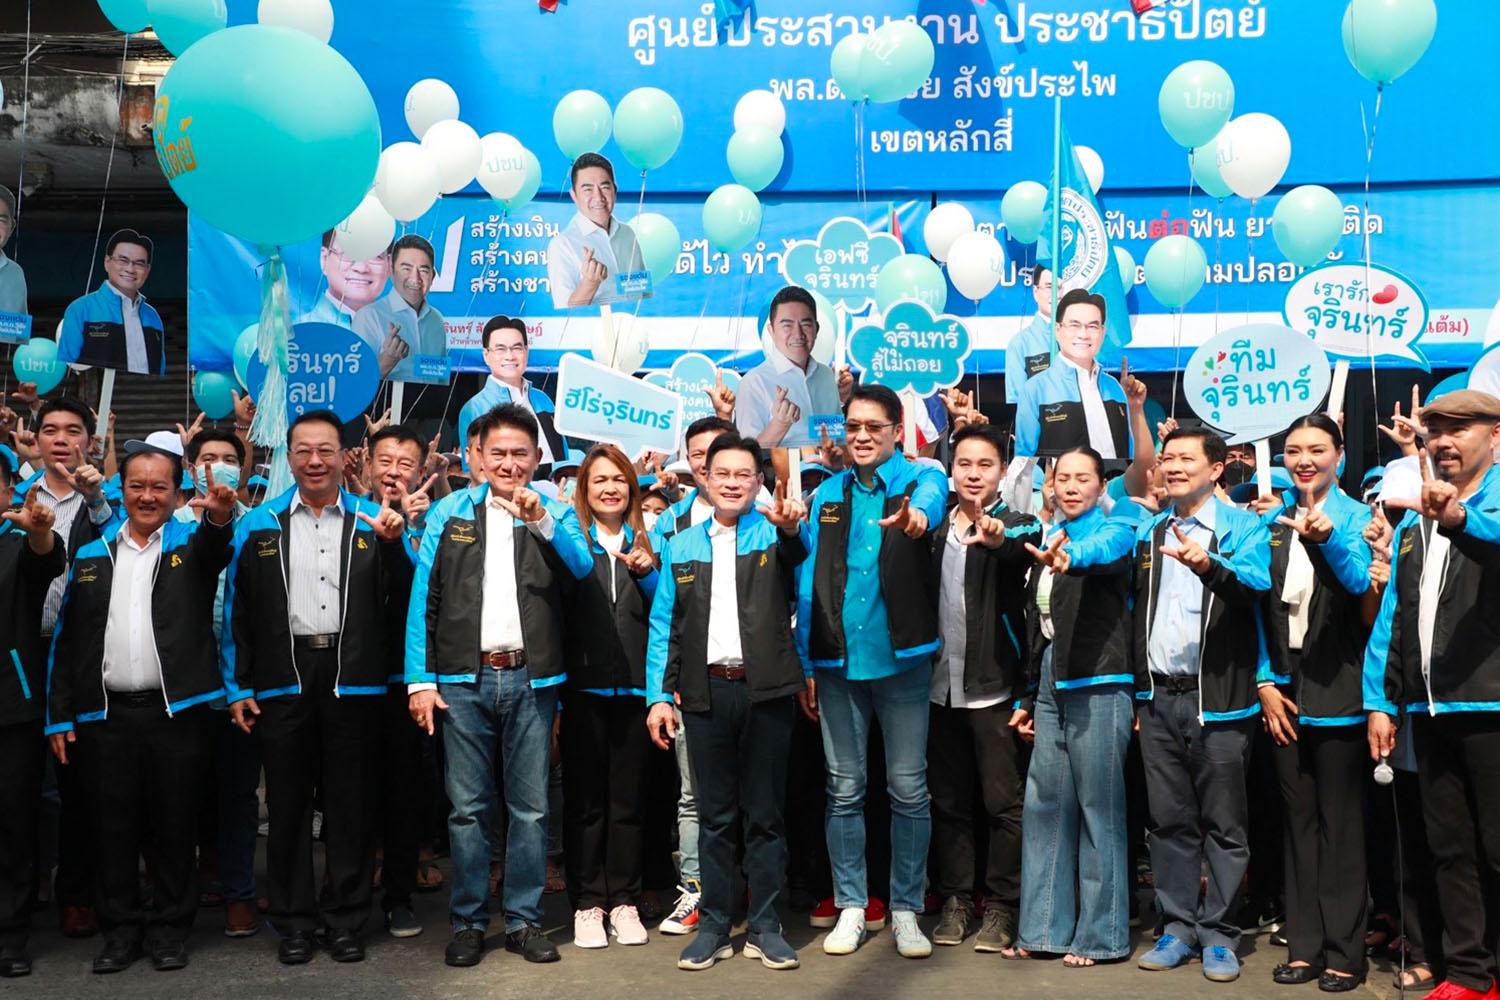 Jurin-led-the-Democrat-Party-to-open-Lak-Si-Election-Center-SPACEBAR-Hero